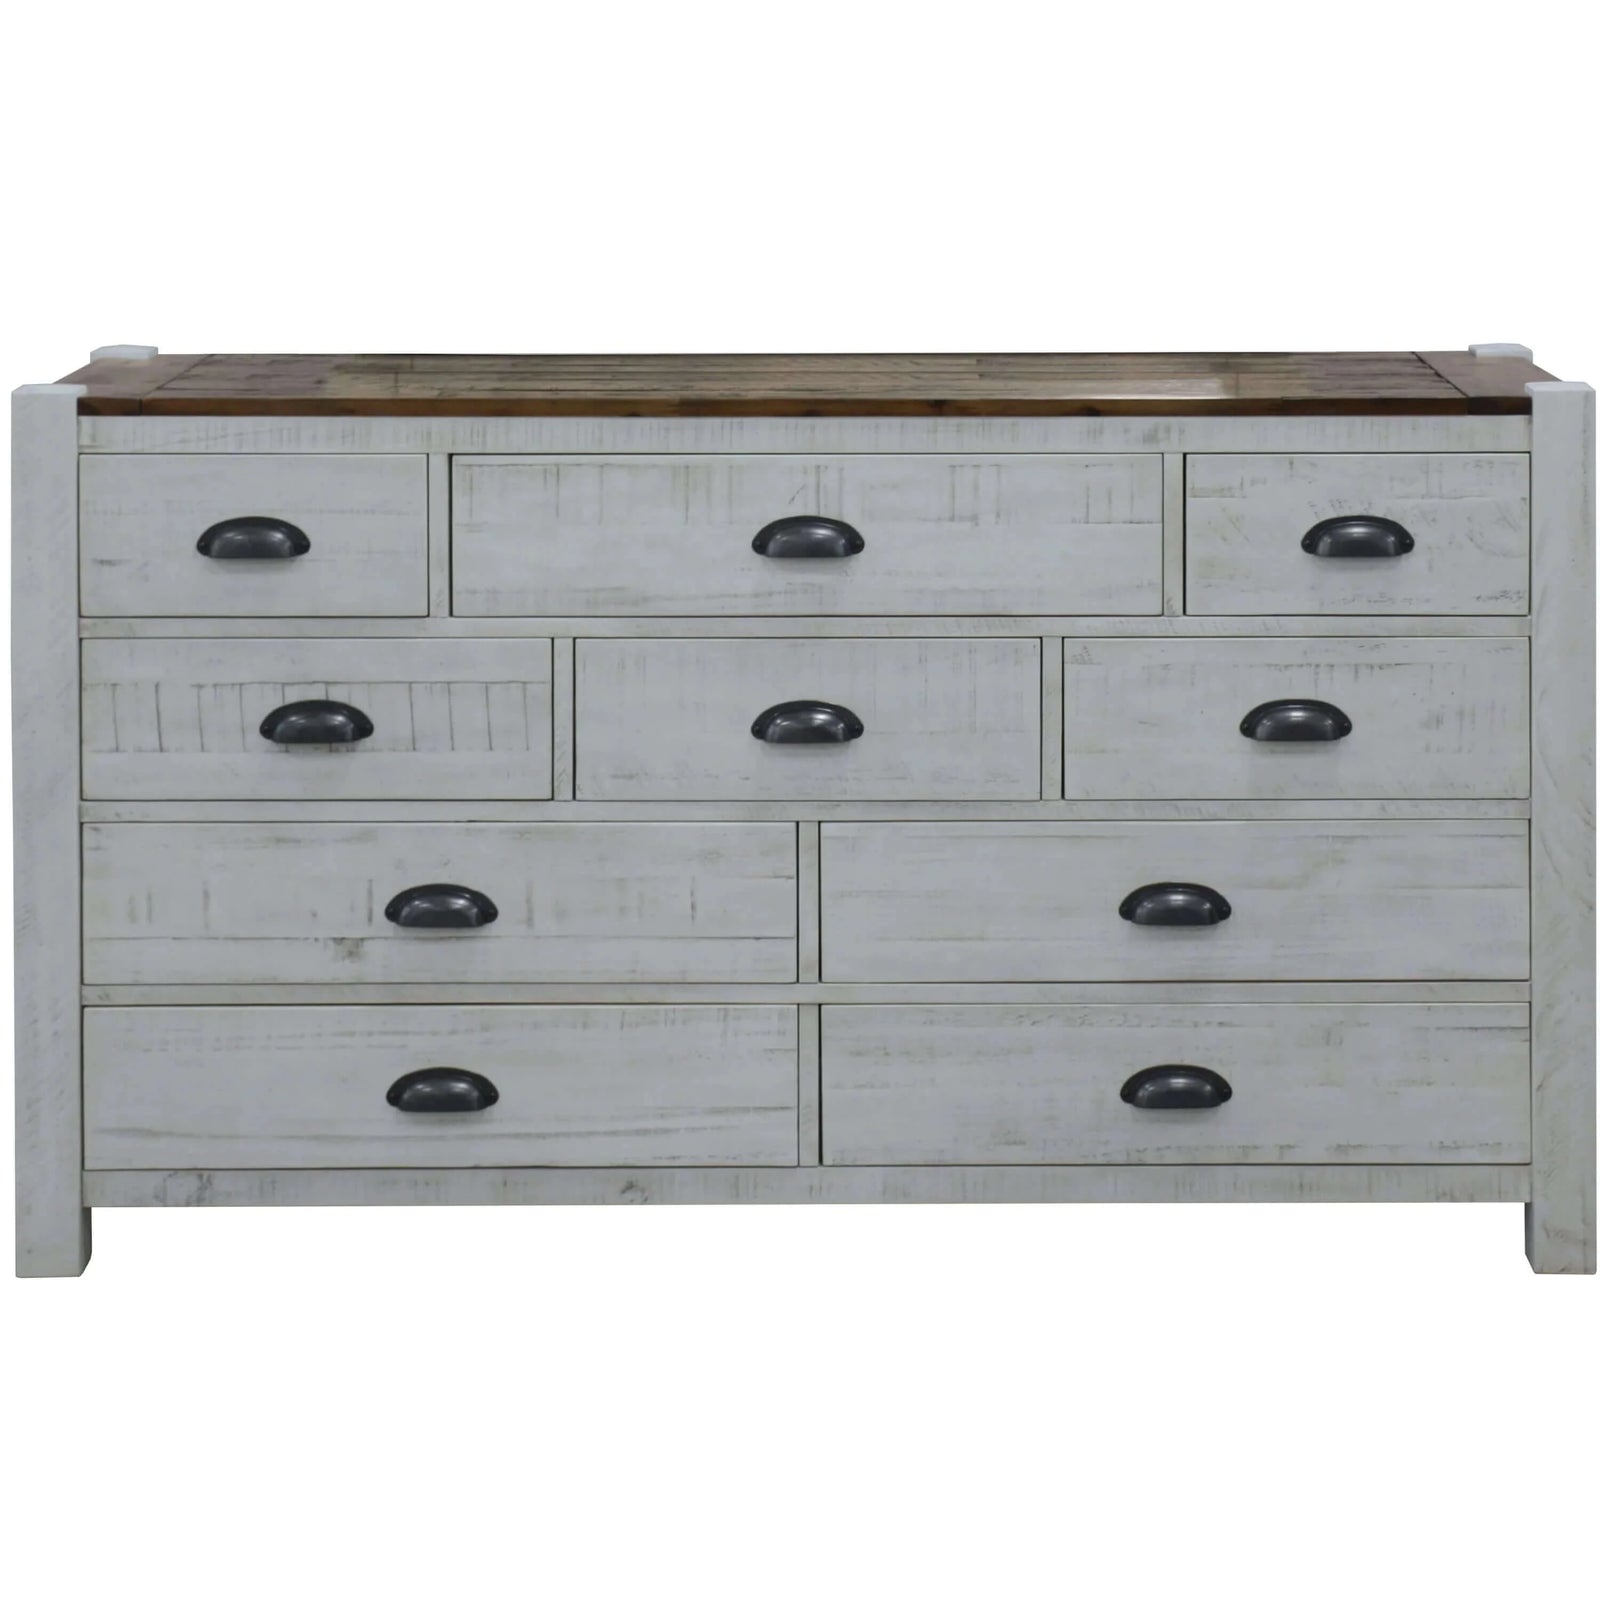 Buy erica dresser 10 chest of drawers solid acacia timber wood cabinet brown white - upinteriors-Upinteriors